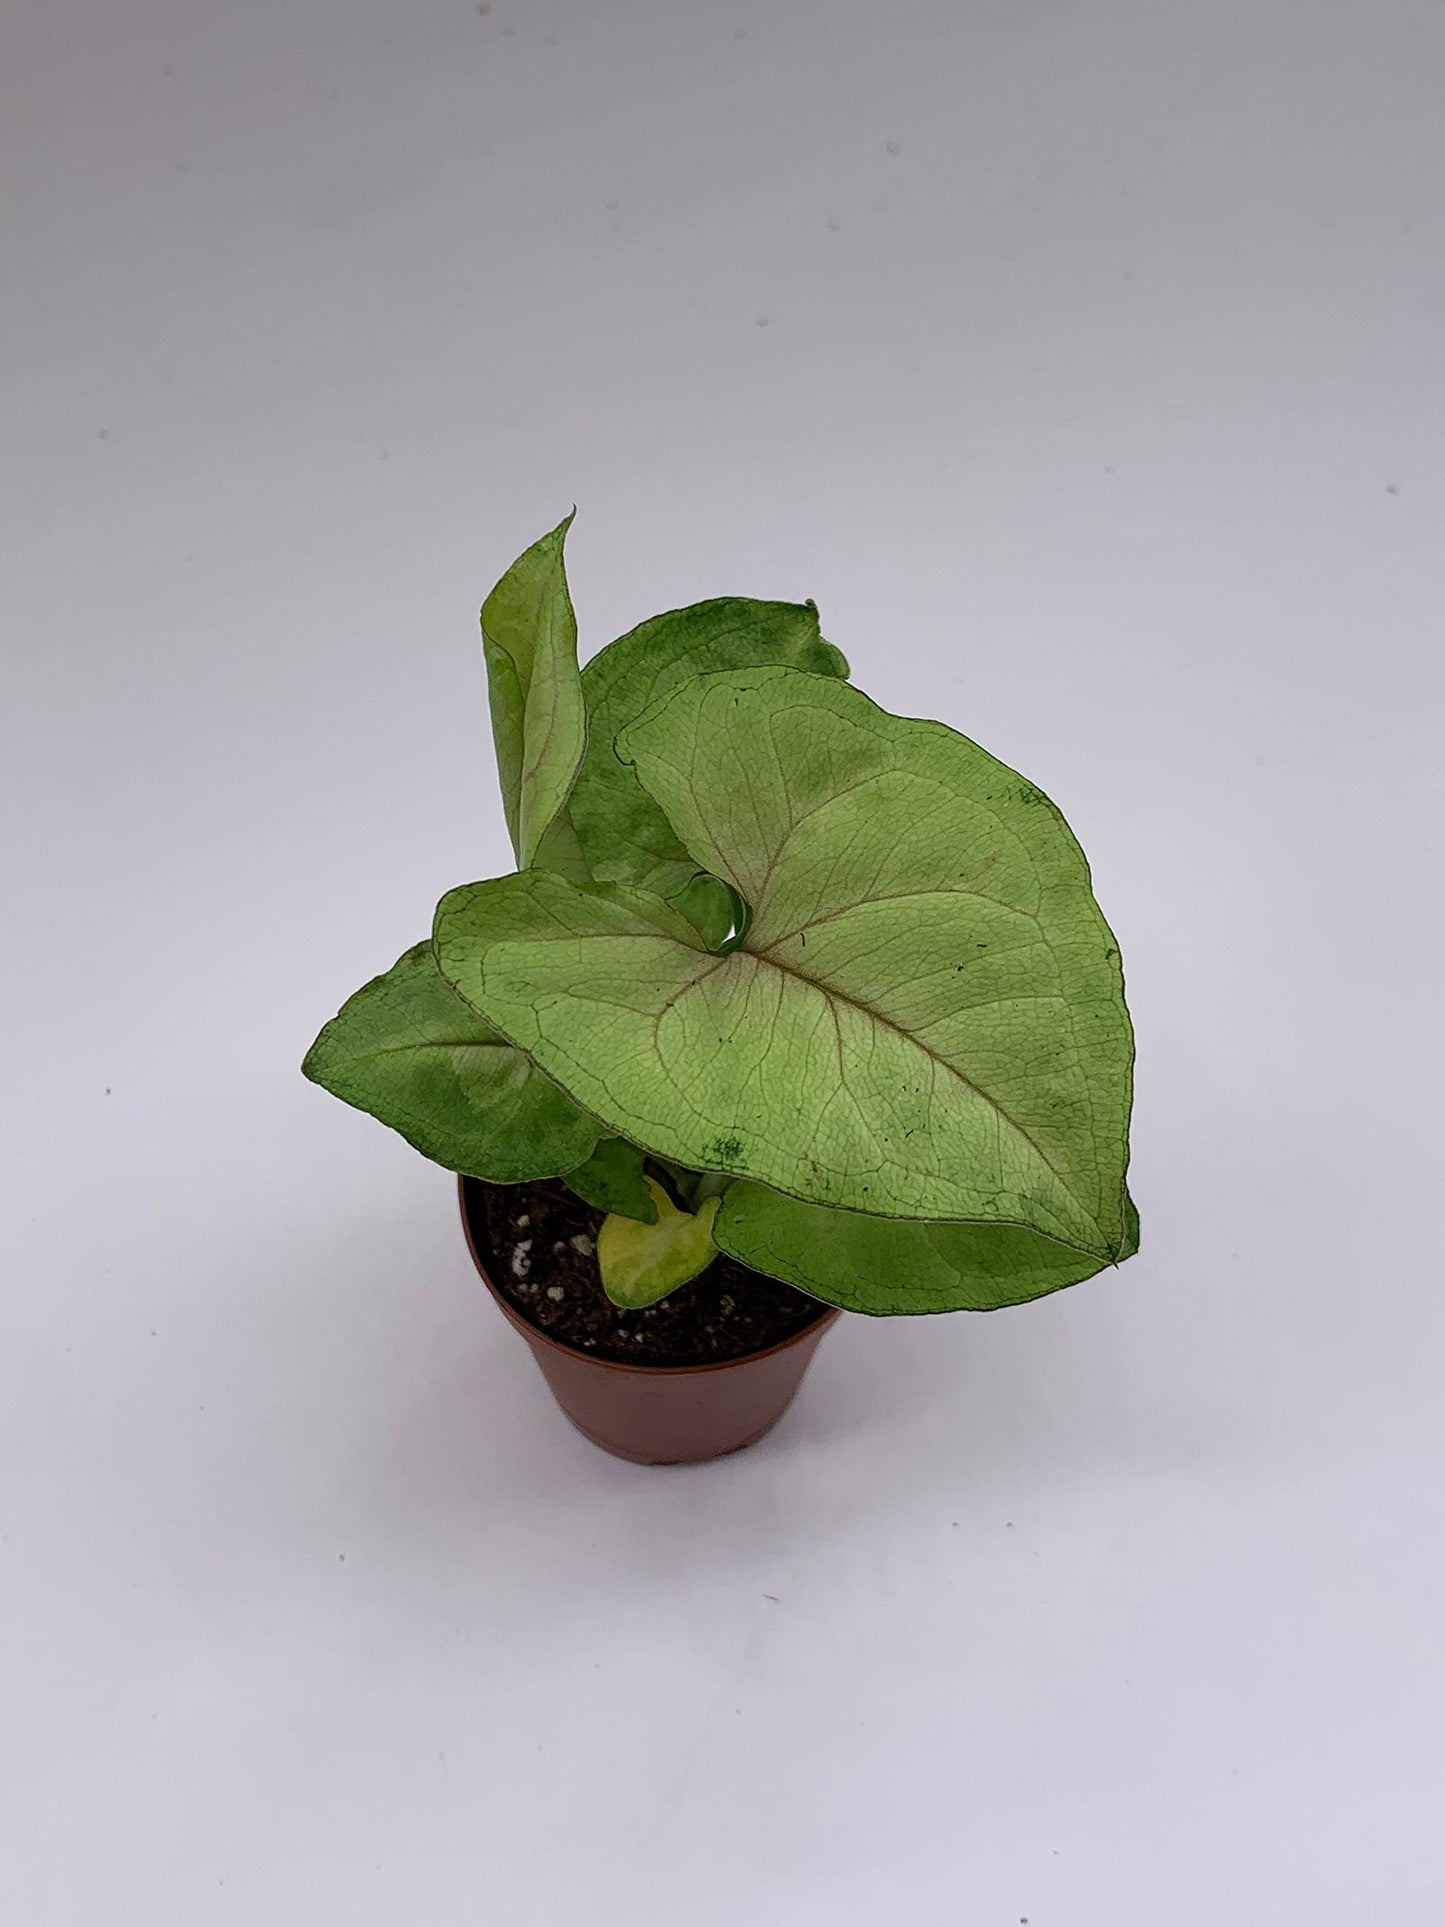 Syngonium Cream Allusion in 2 inch Pot, Well Rooted Live Starter House Plant